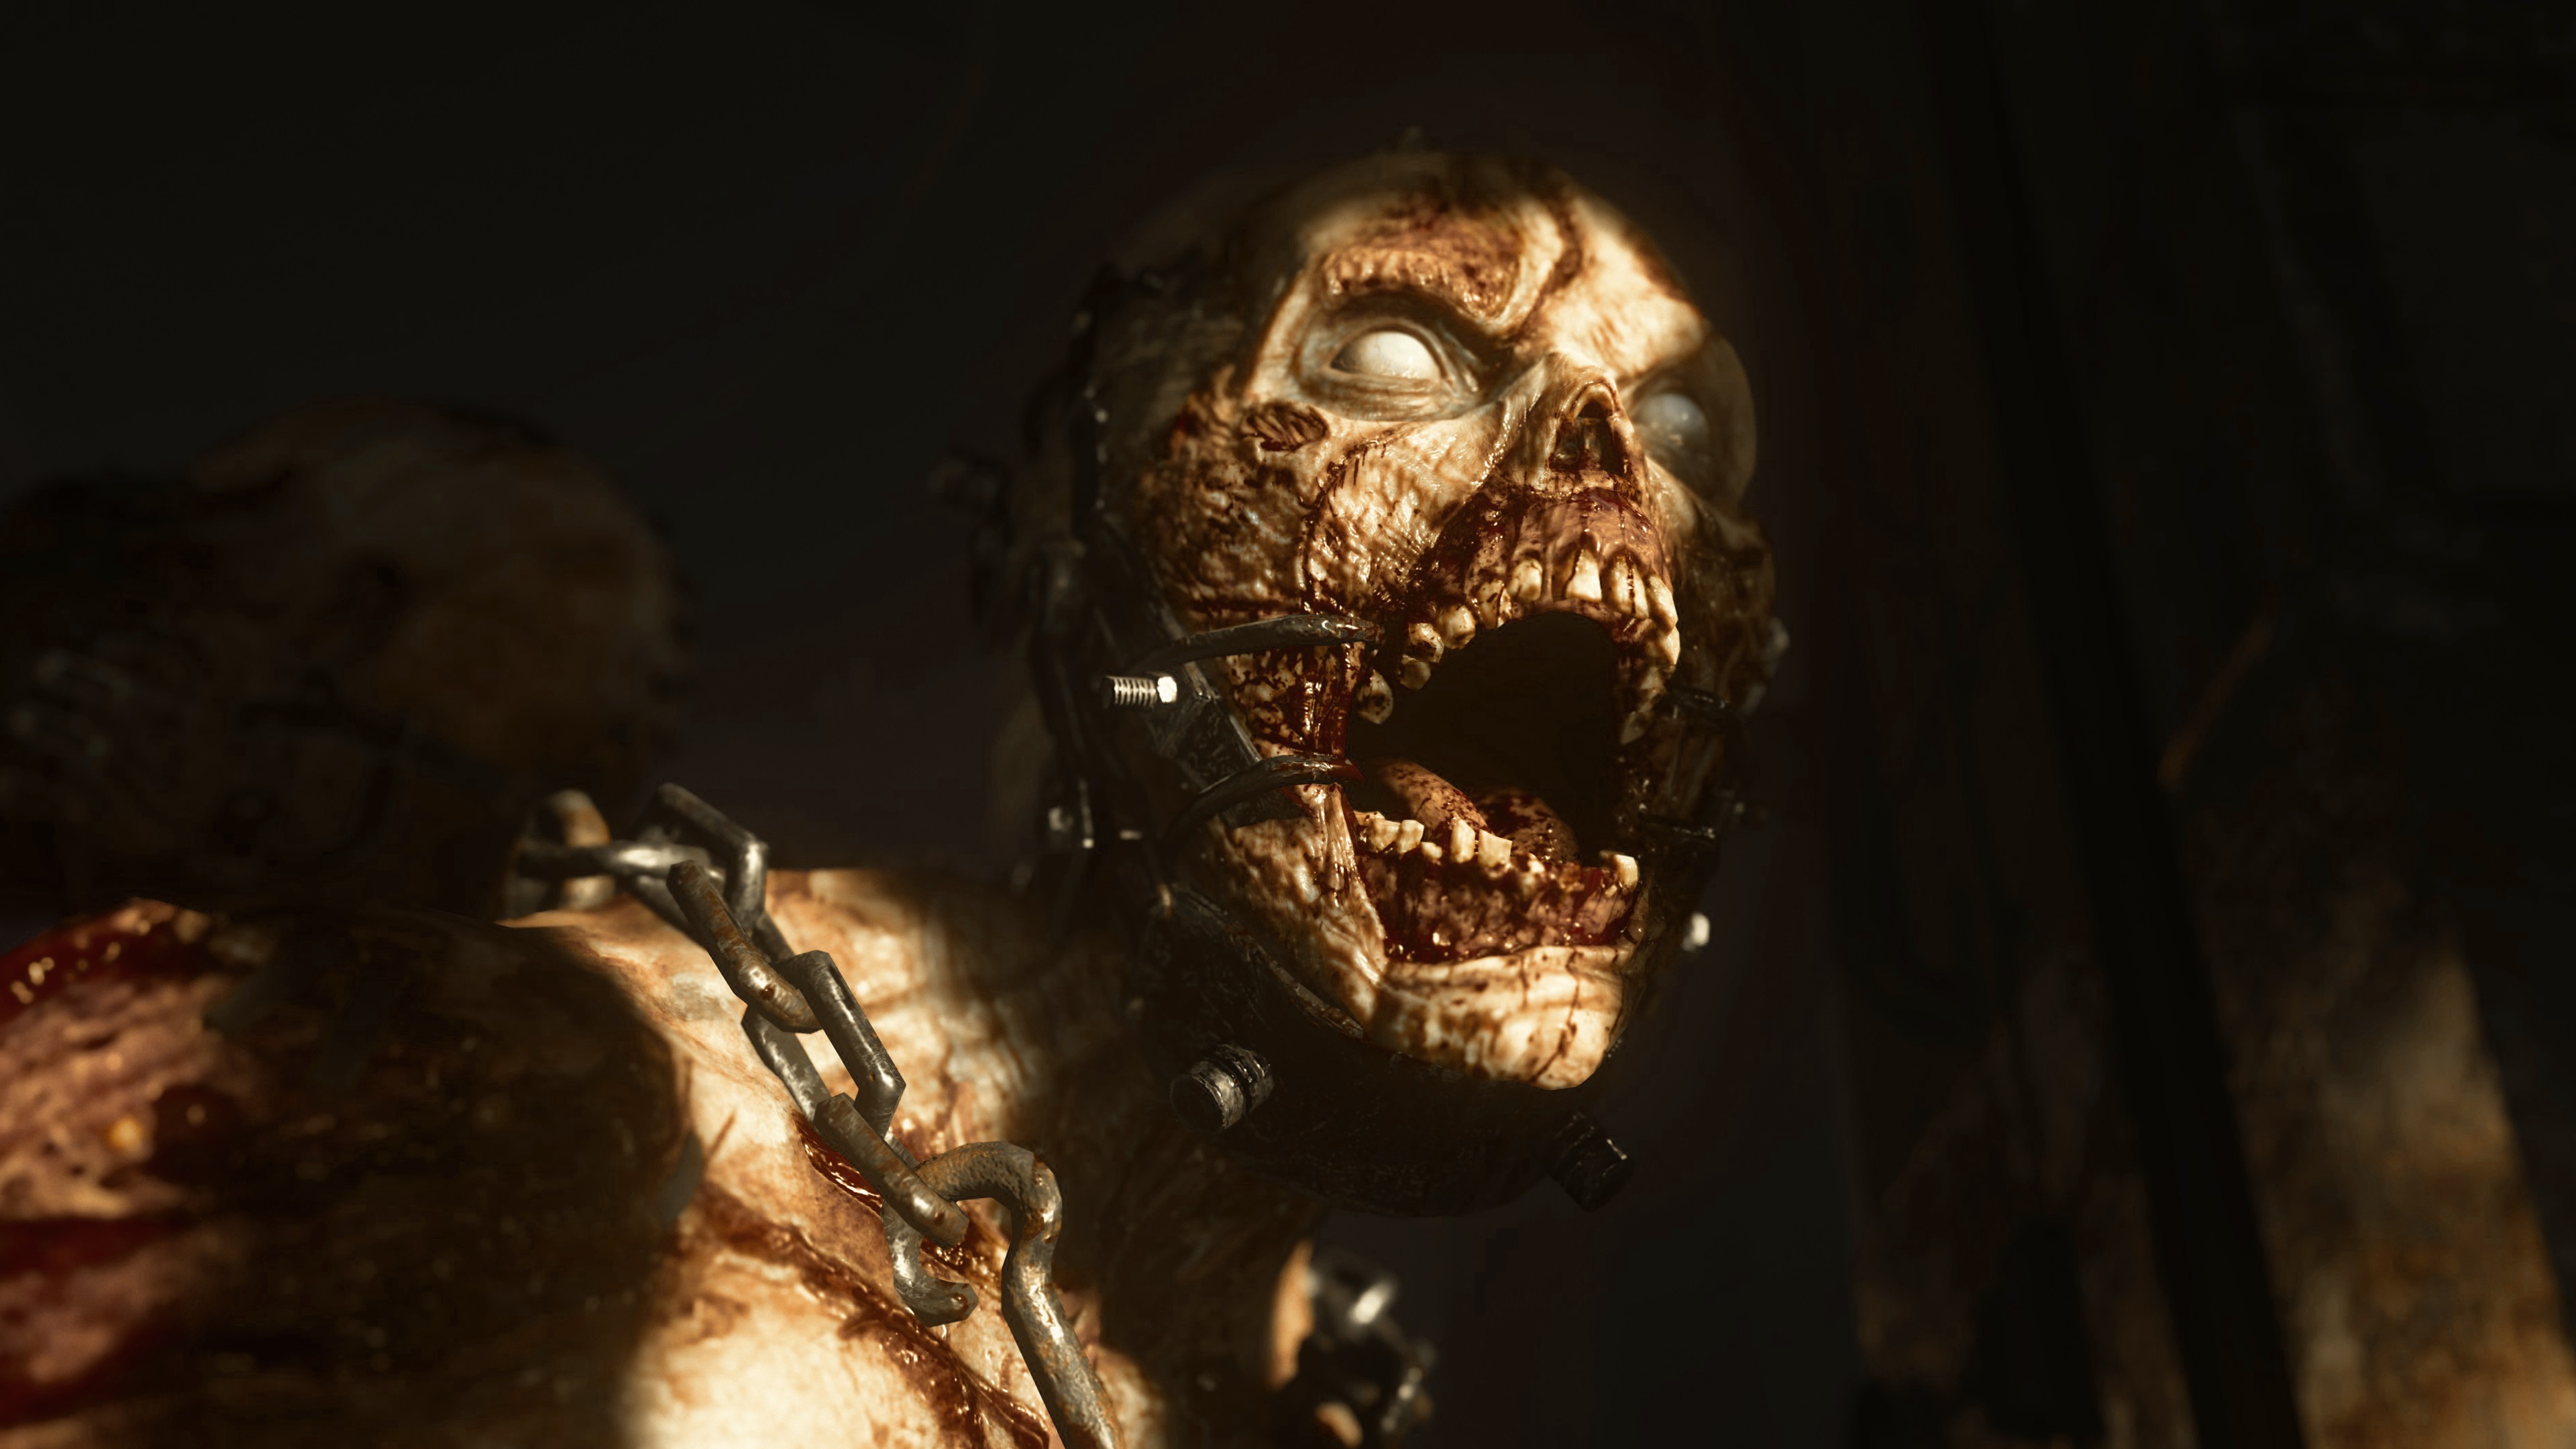 Welcome to Call of Duty: Vanguard Zombies — Q&A With the Treyarch Team — Call  of Duty®: Vanguard — Blizzard News